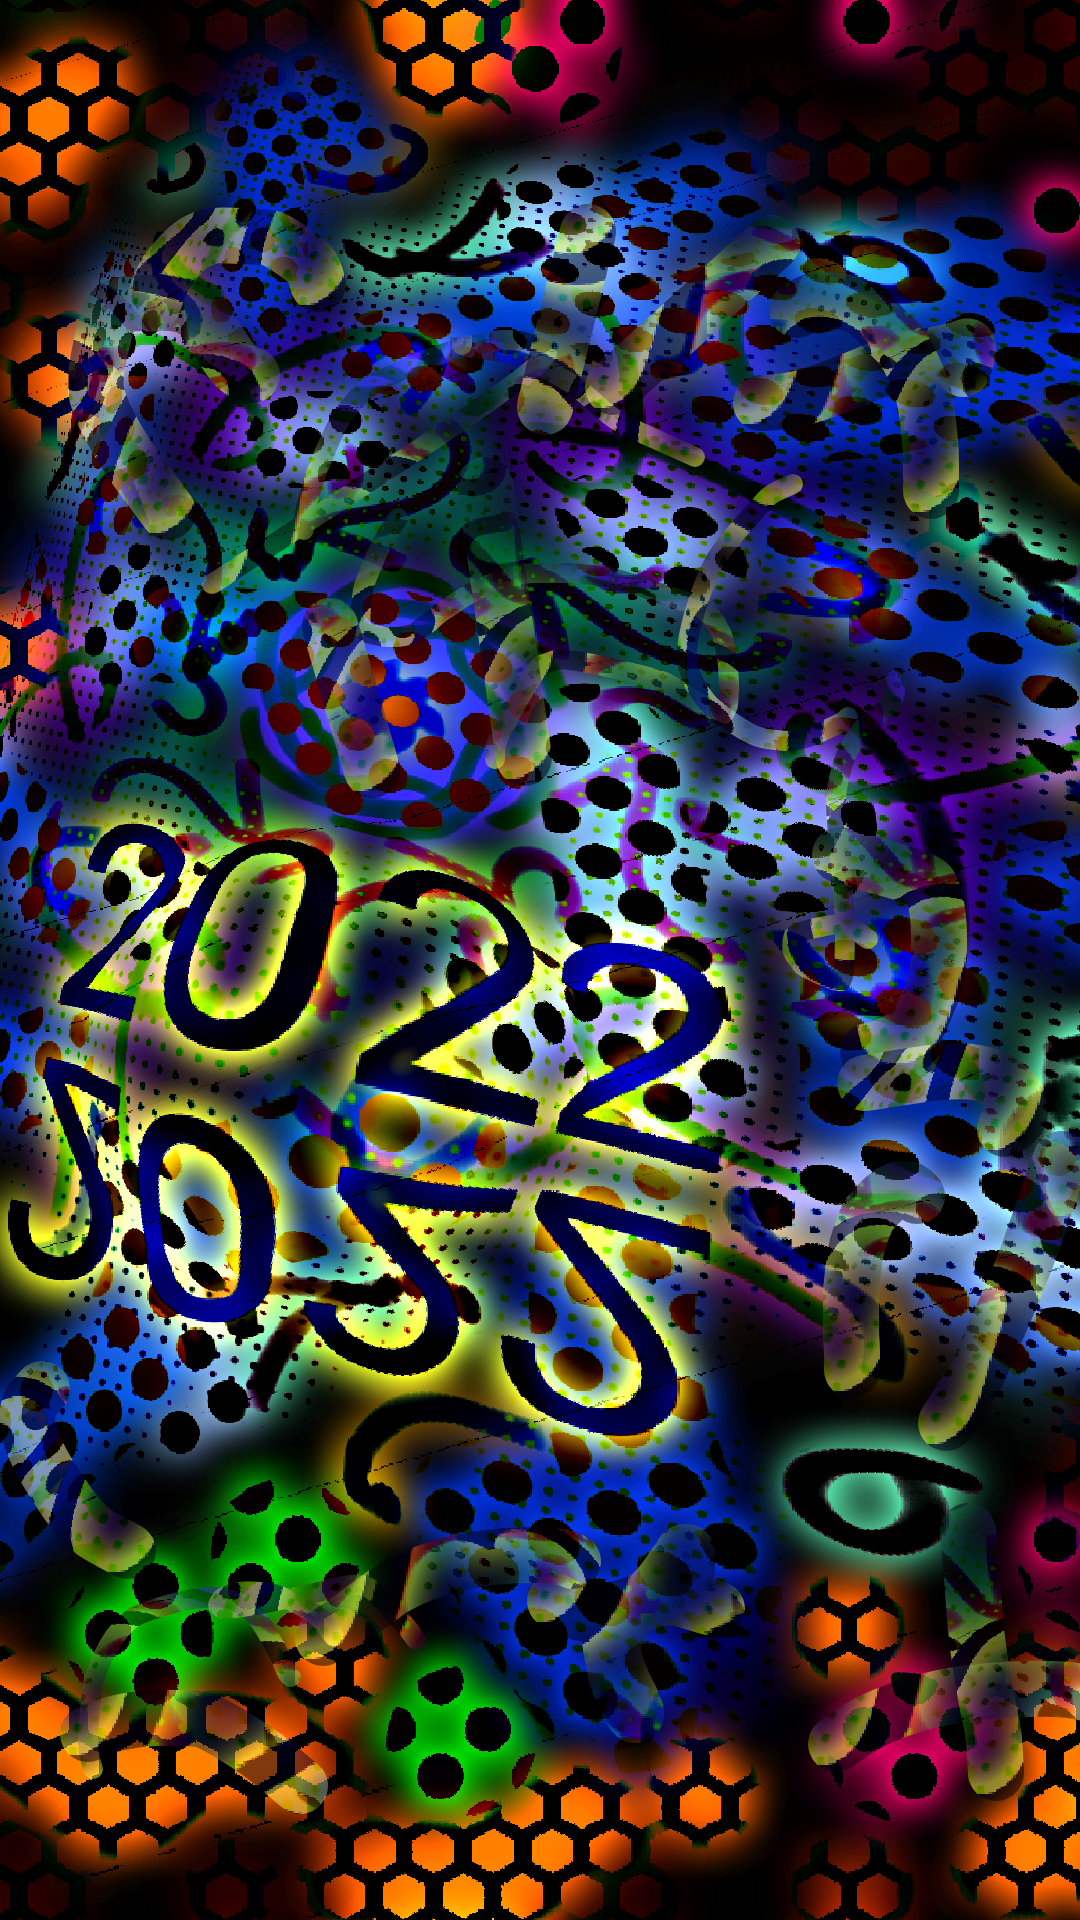 sumo02jan01 - created by artzner with paint